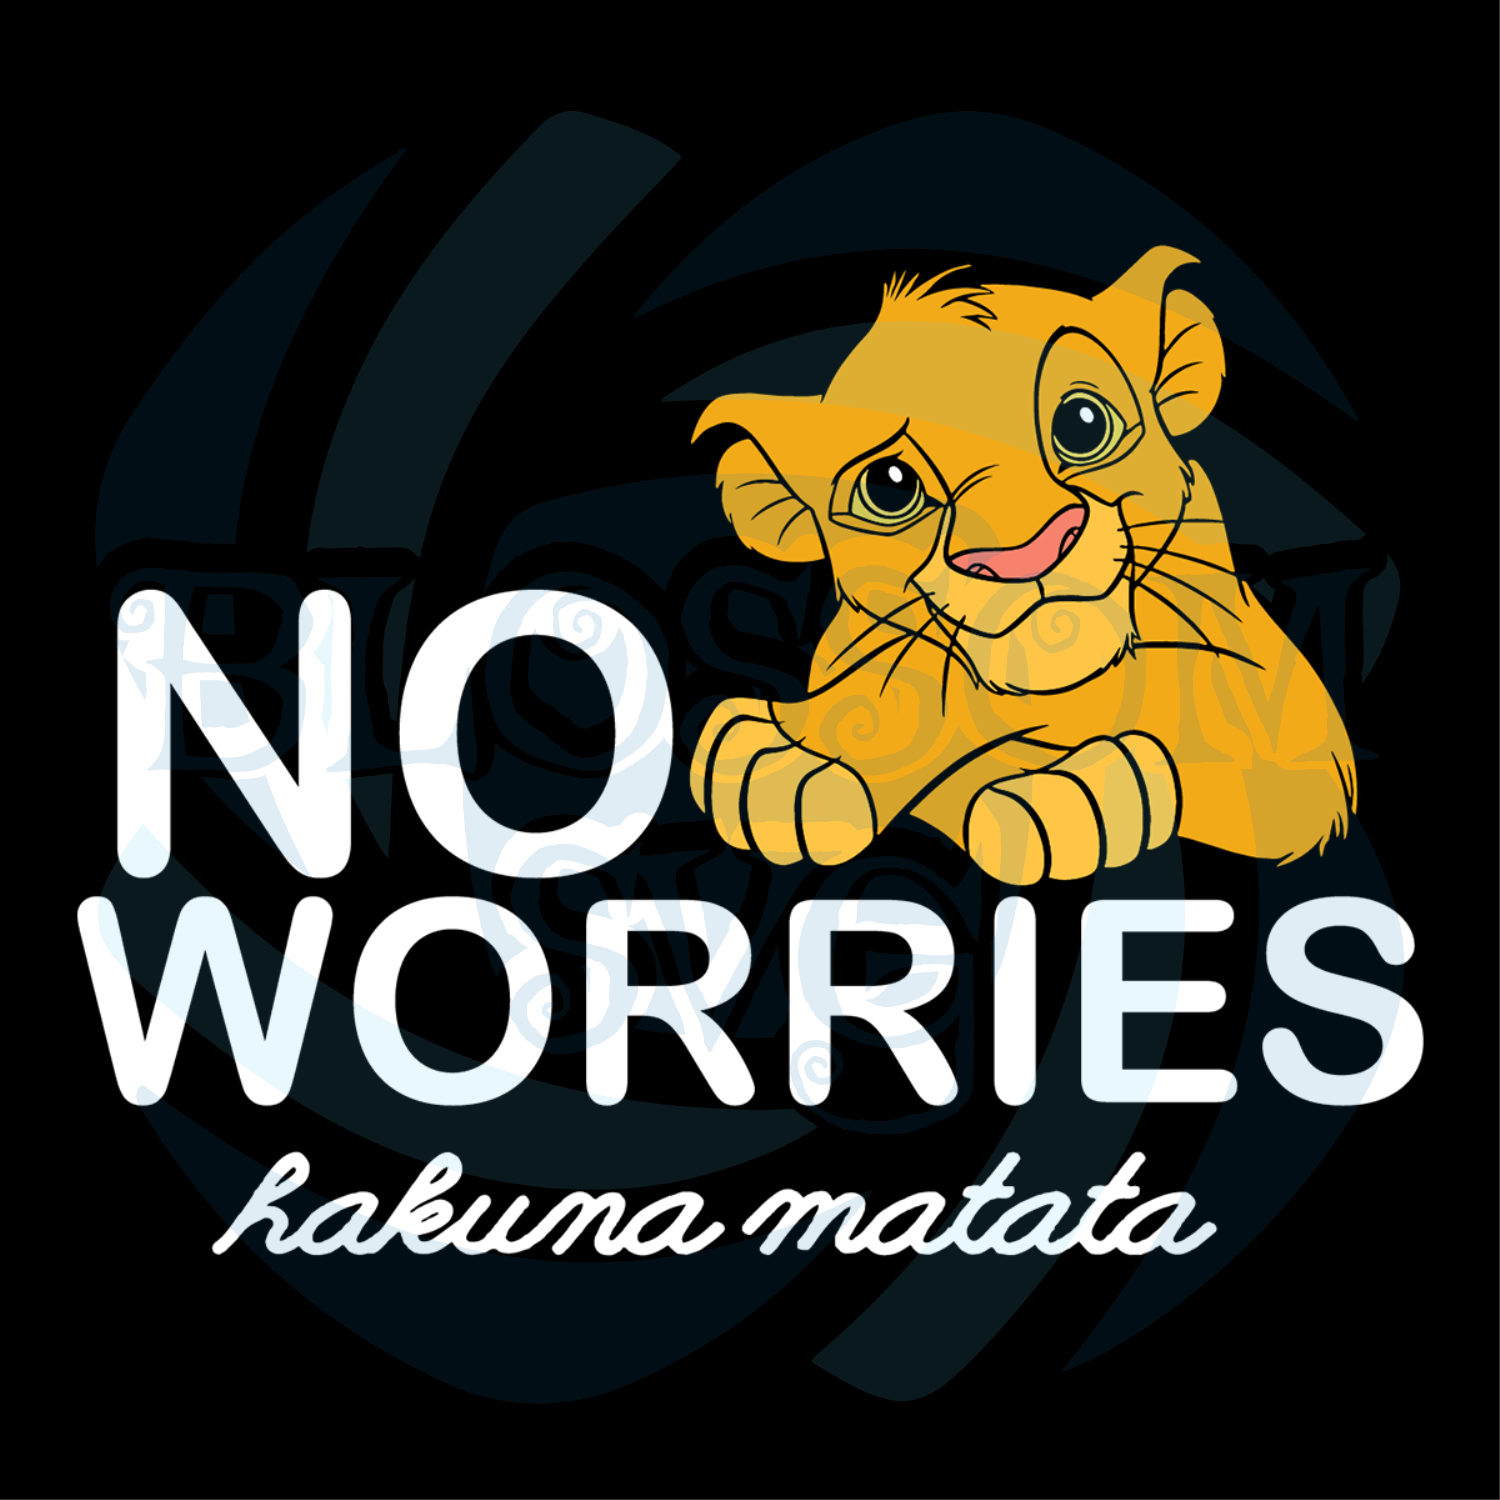 Cute Simba Svg Archives - BlossomSVG